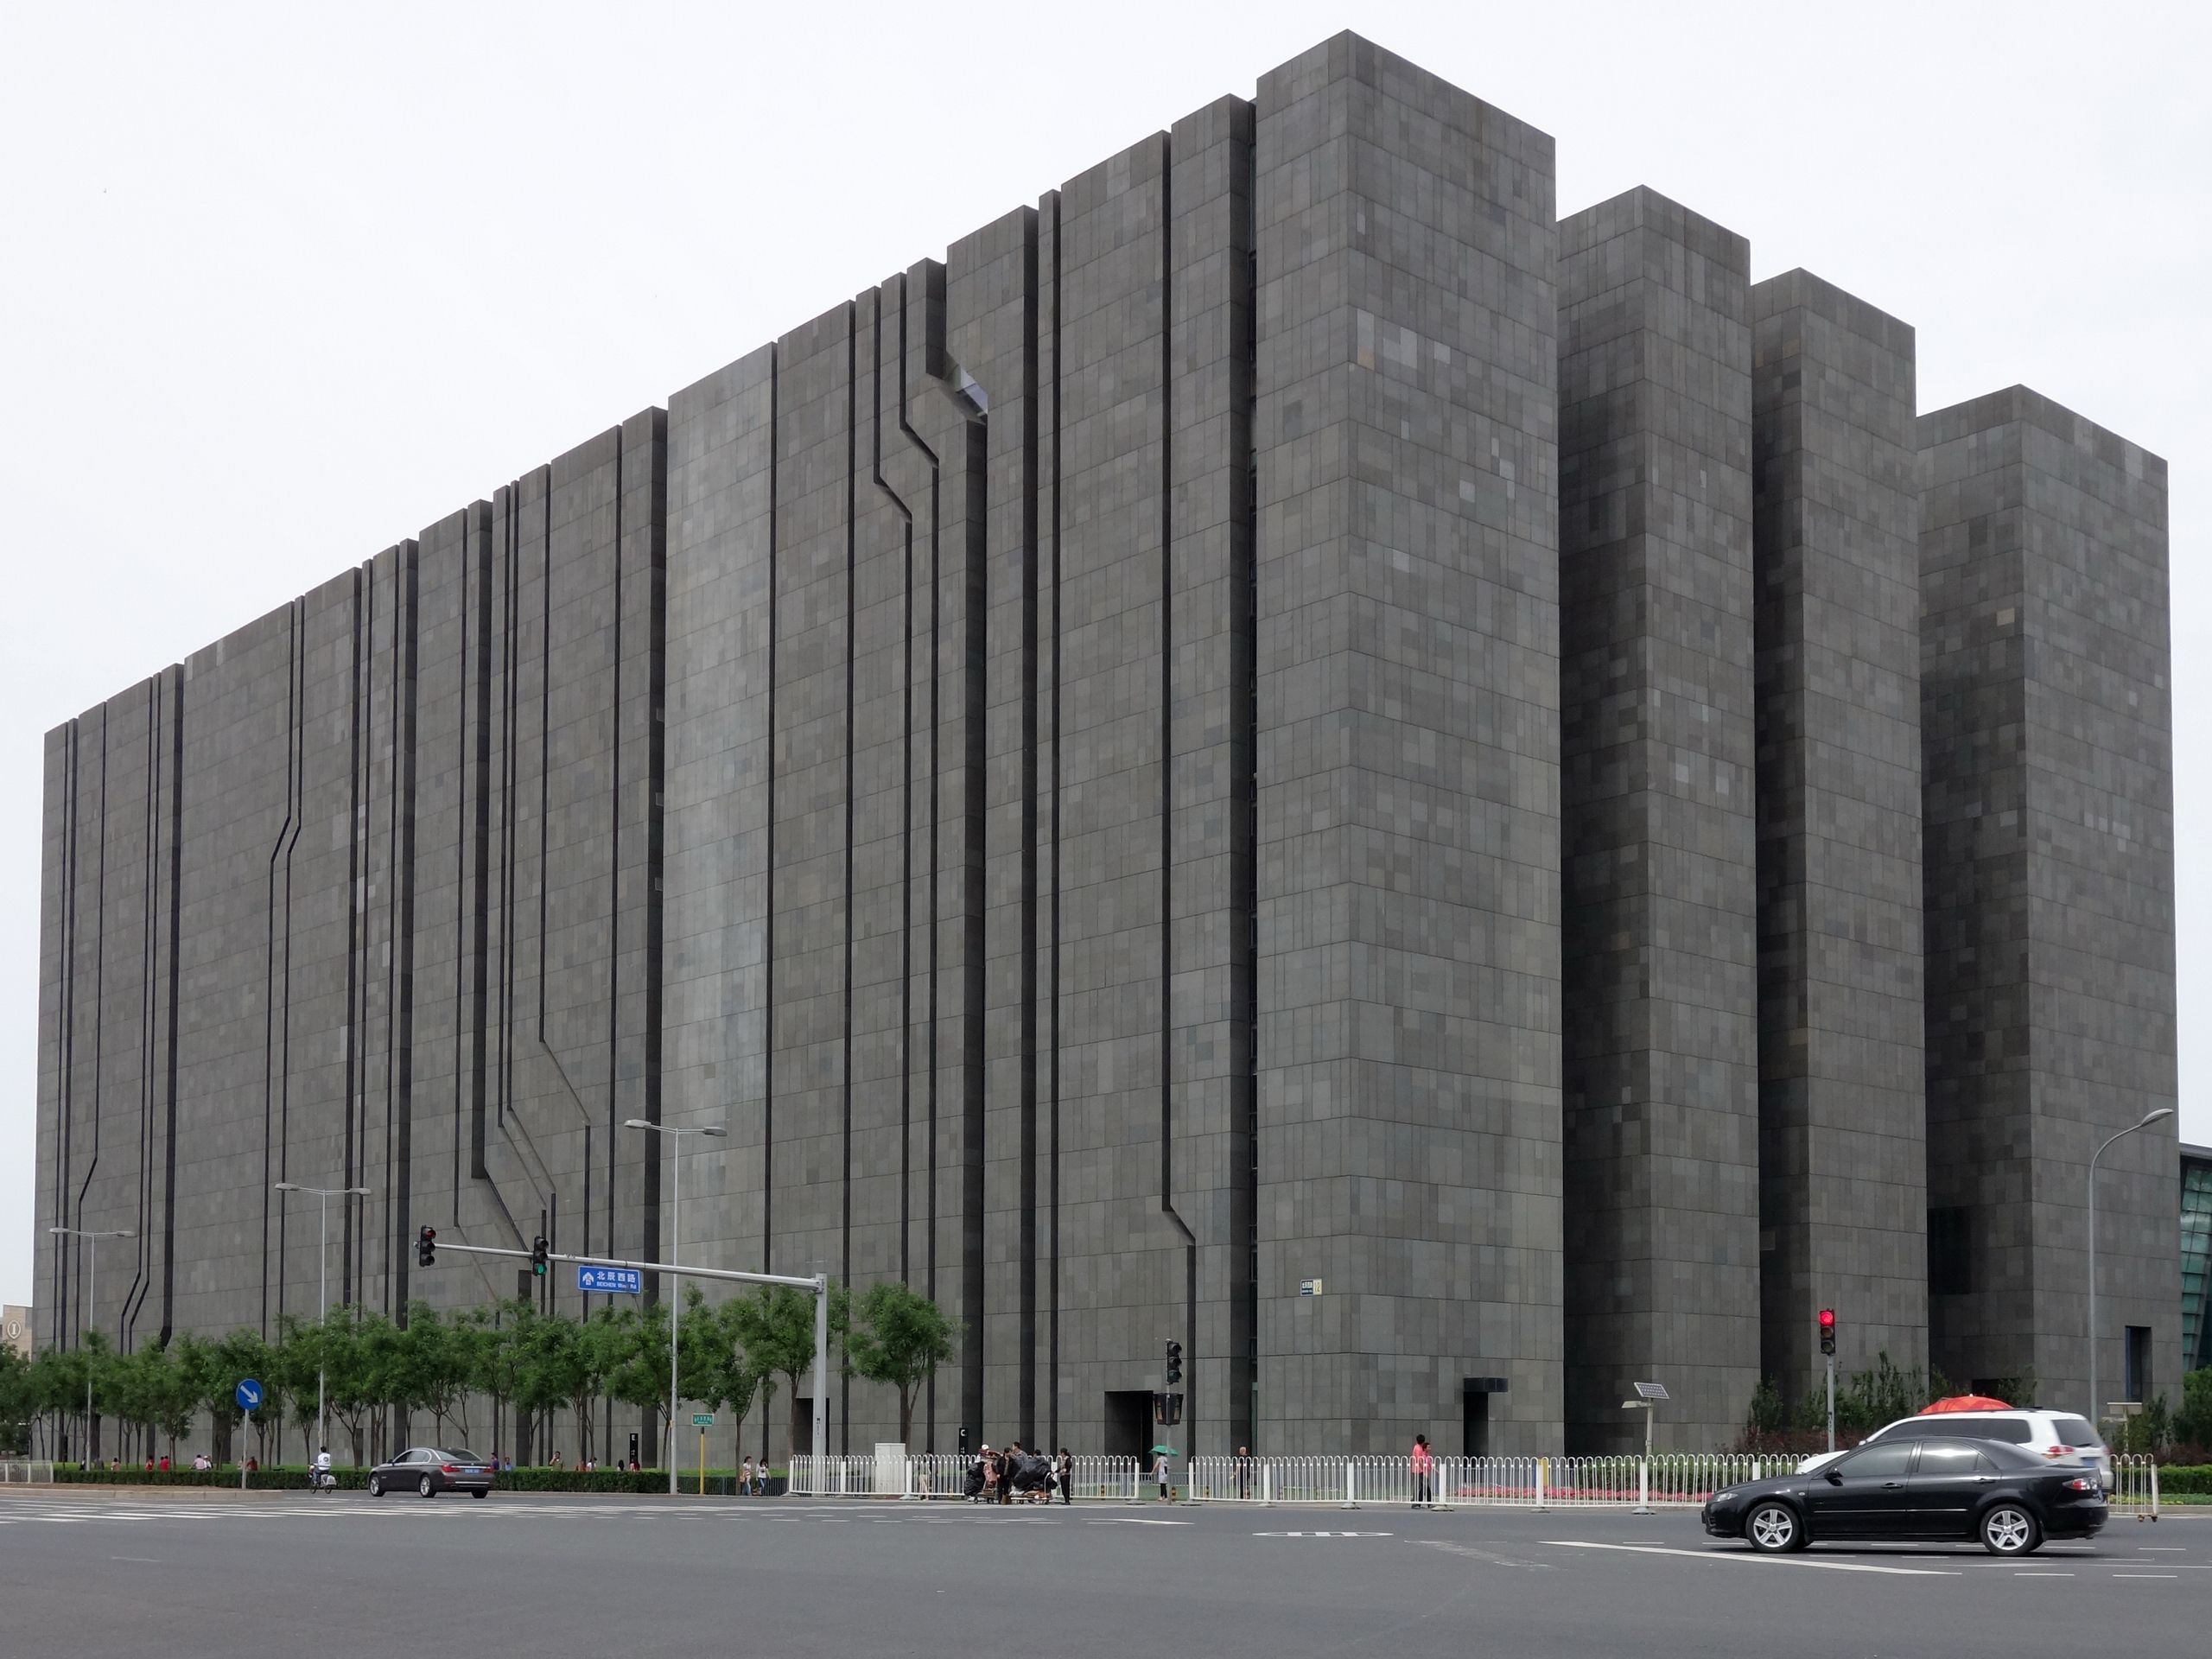 A dark gray block-like building towering over an intersection, with ...